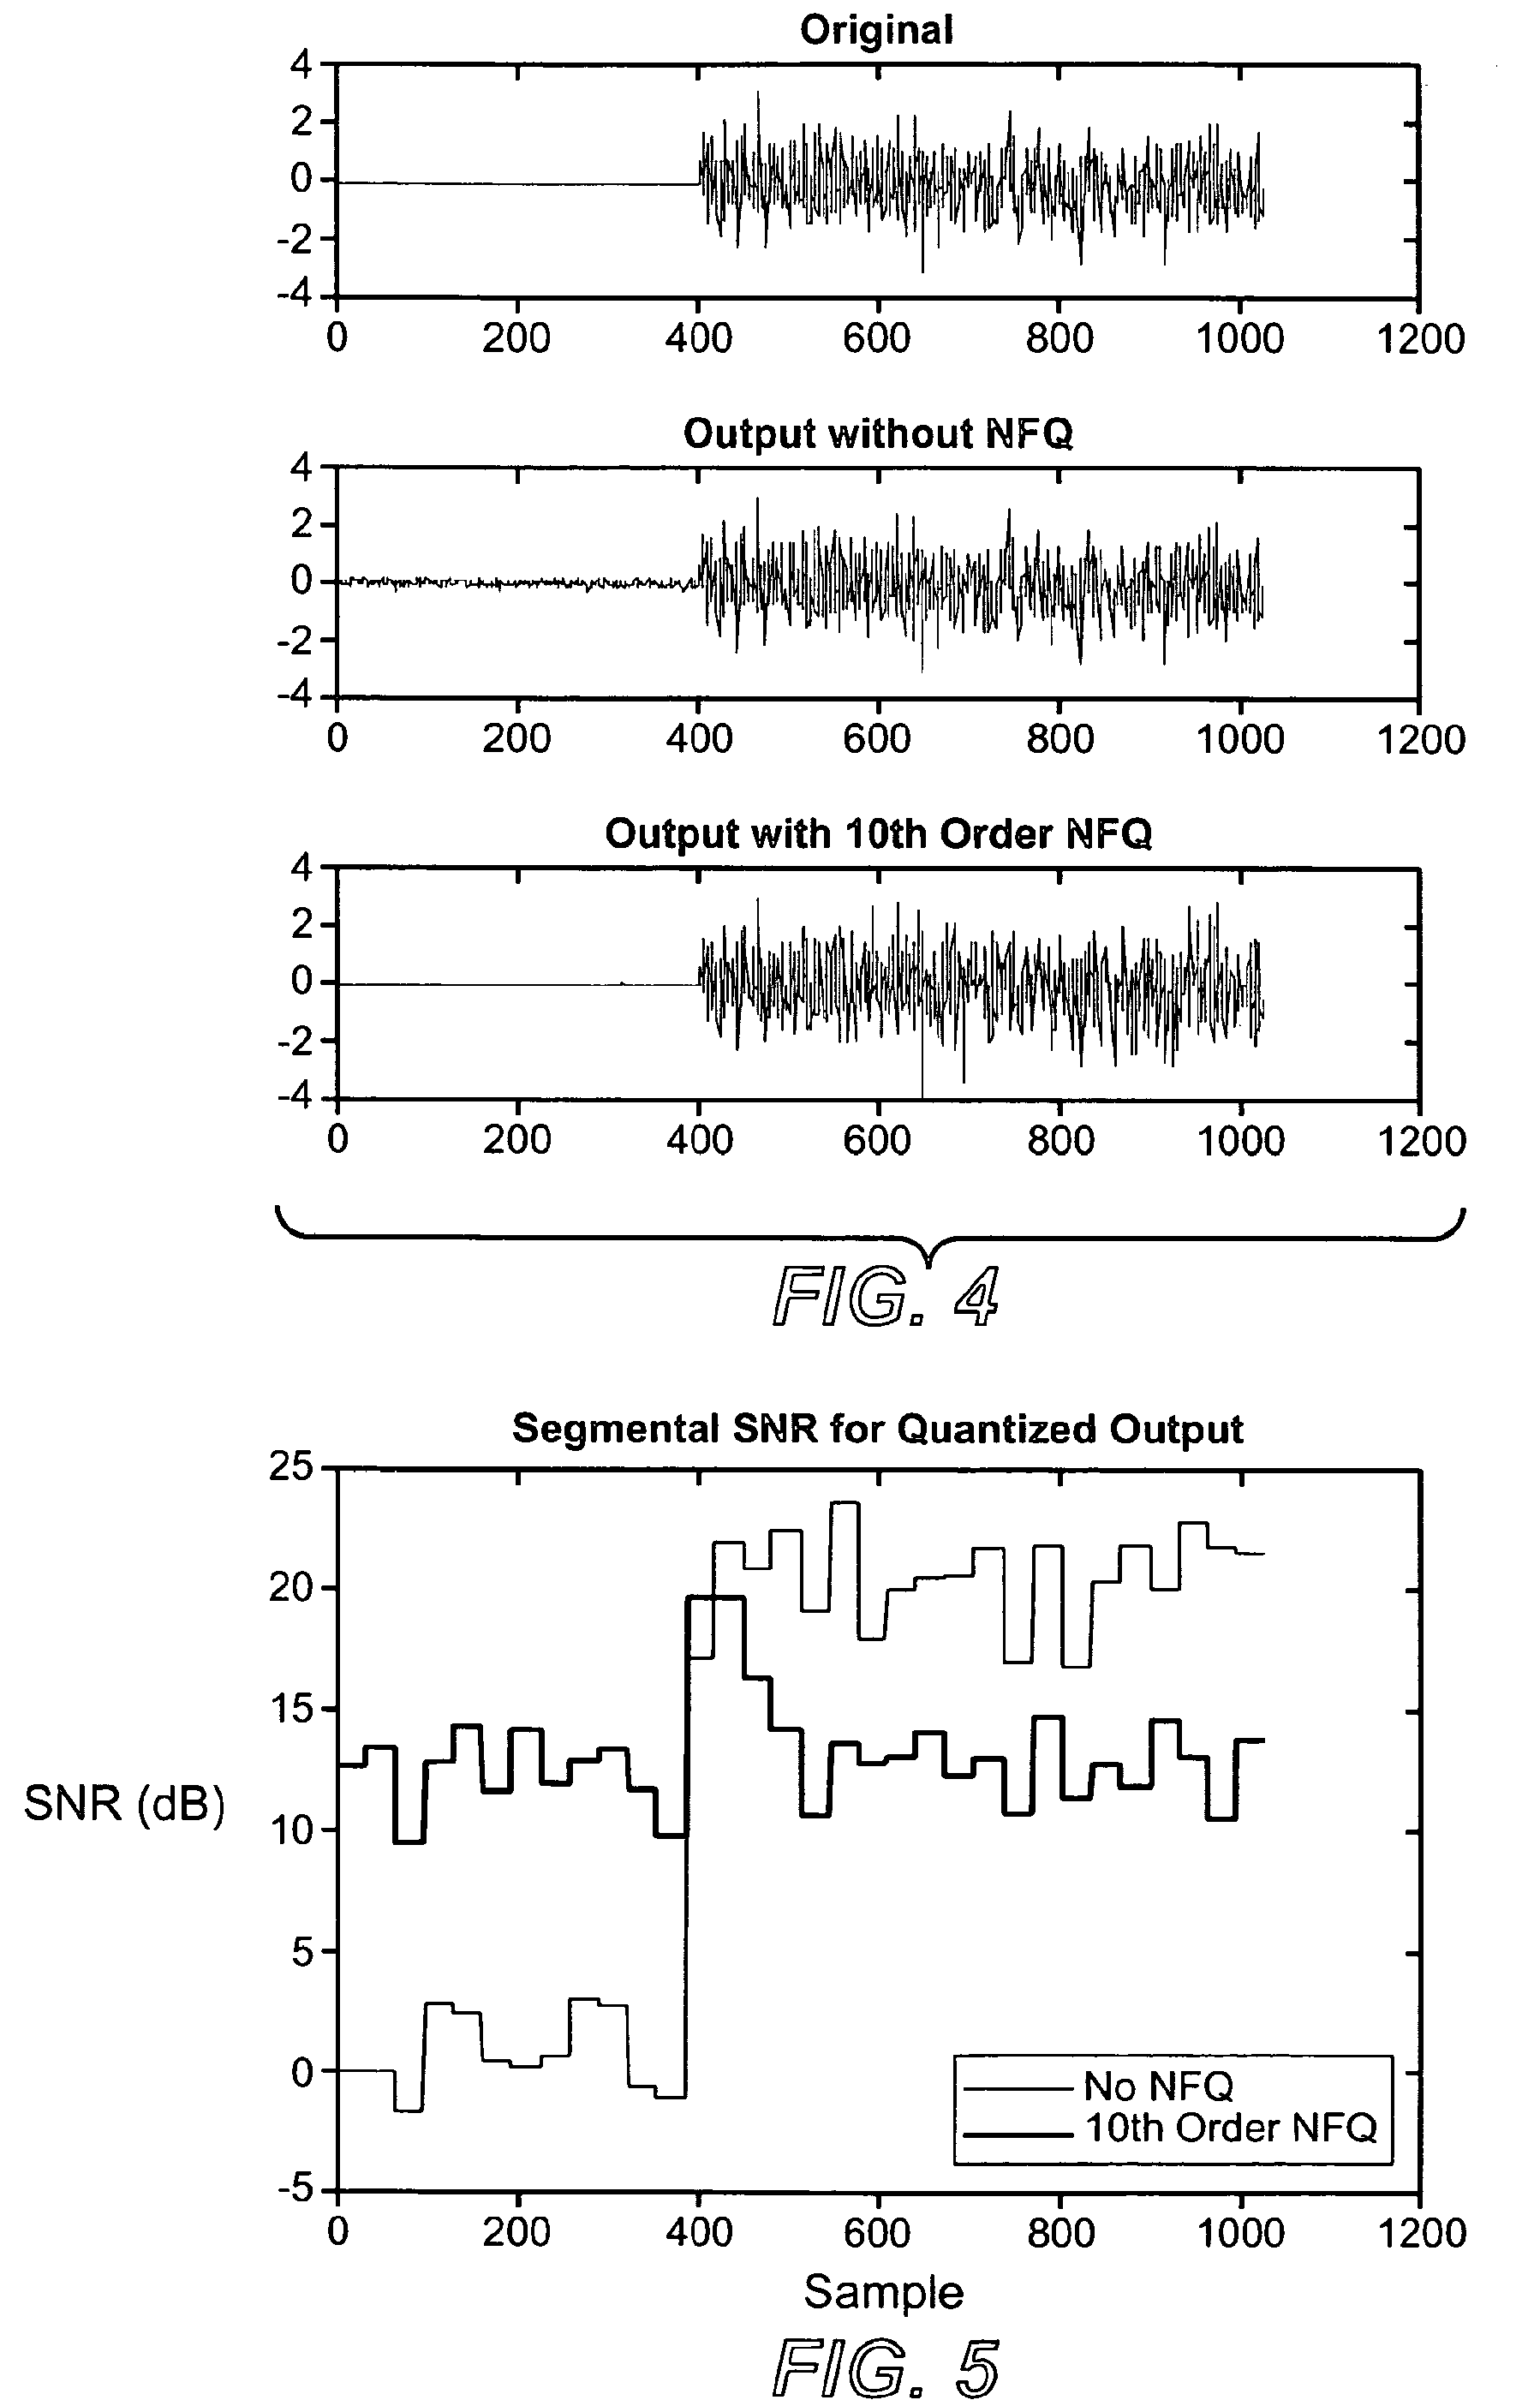 Arbitrary shaping of temporal noise envelope without side-information